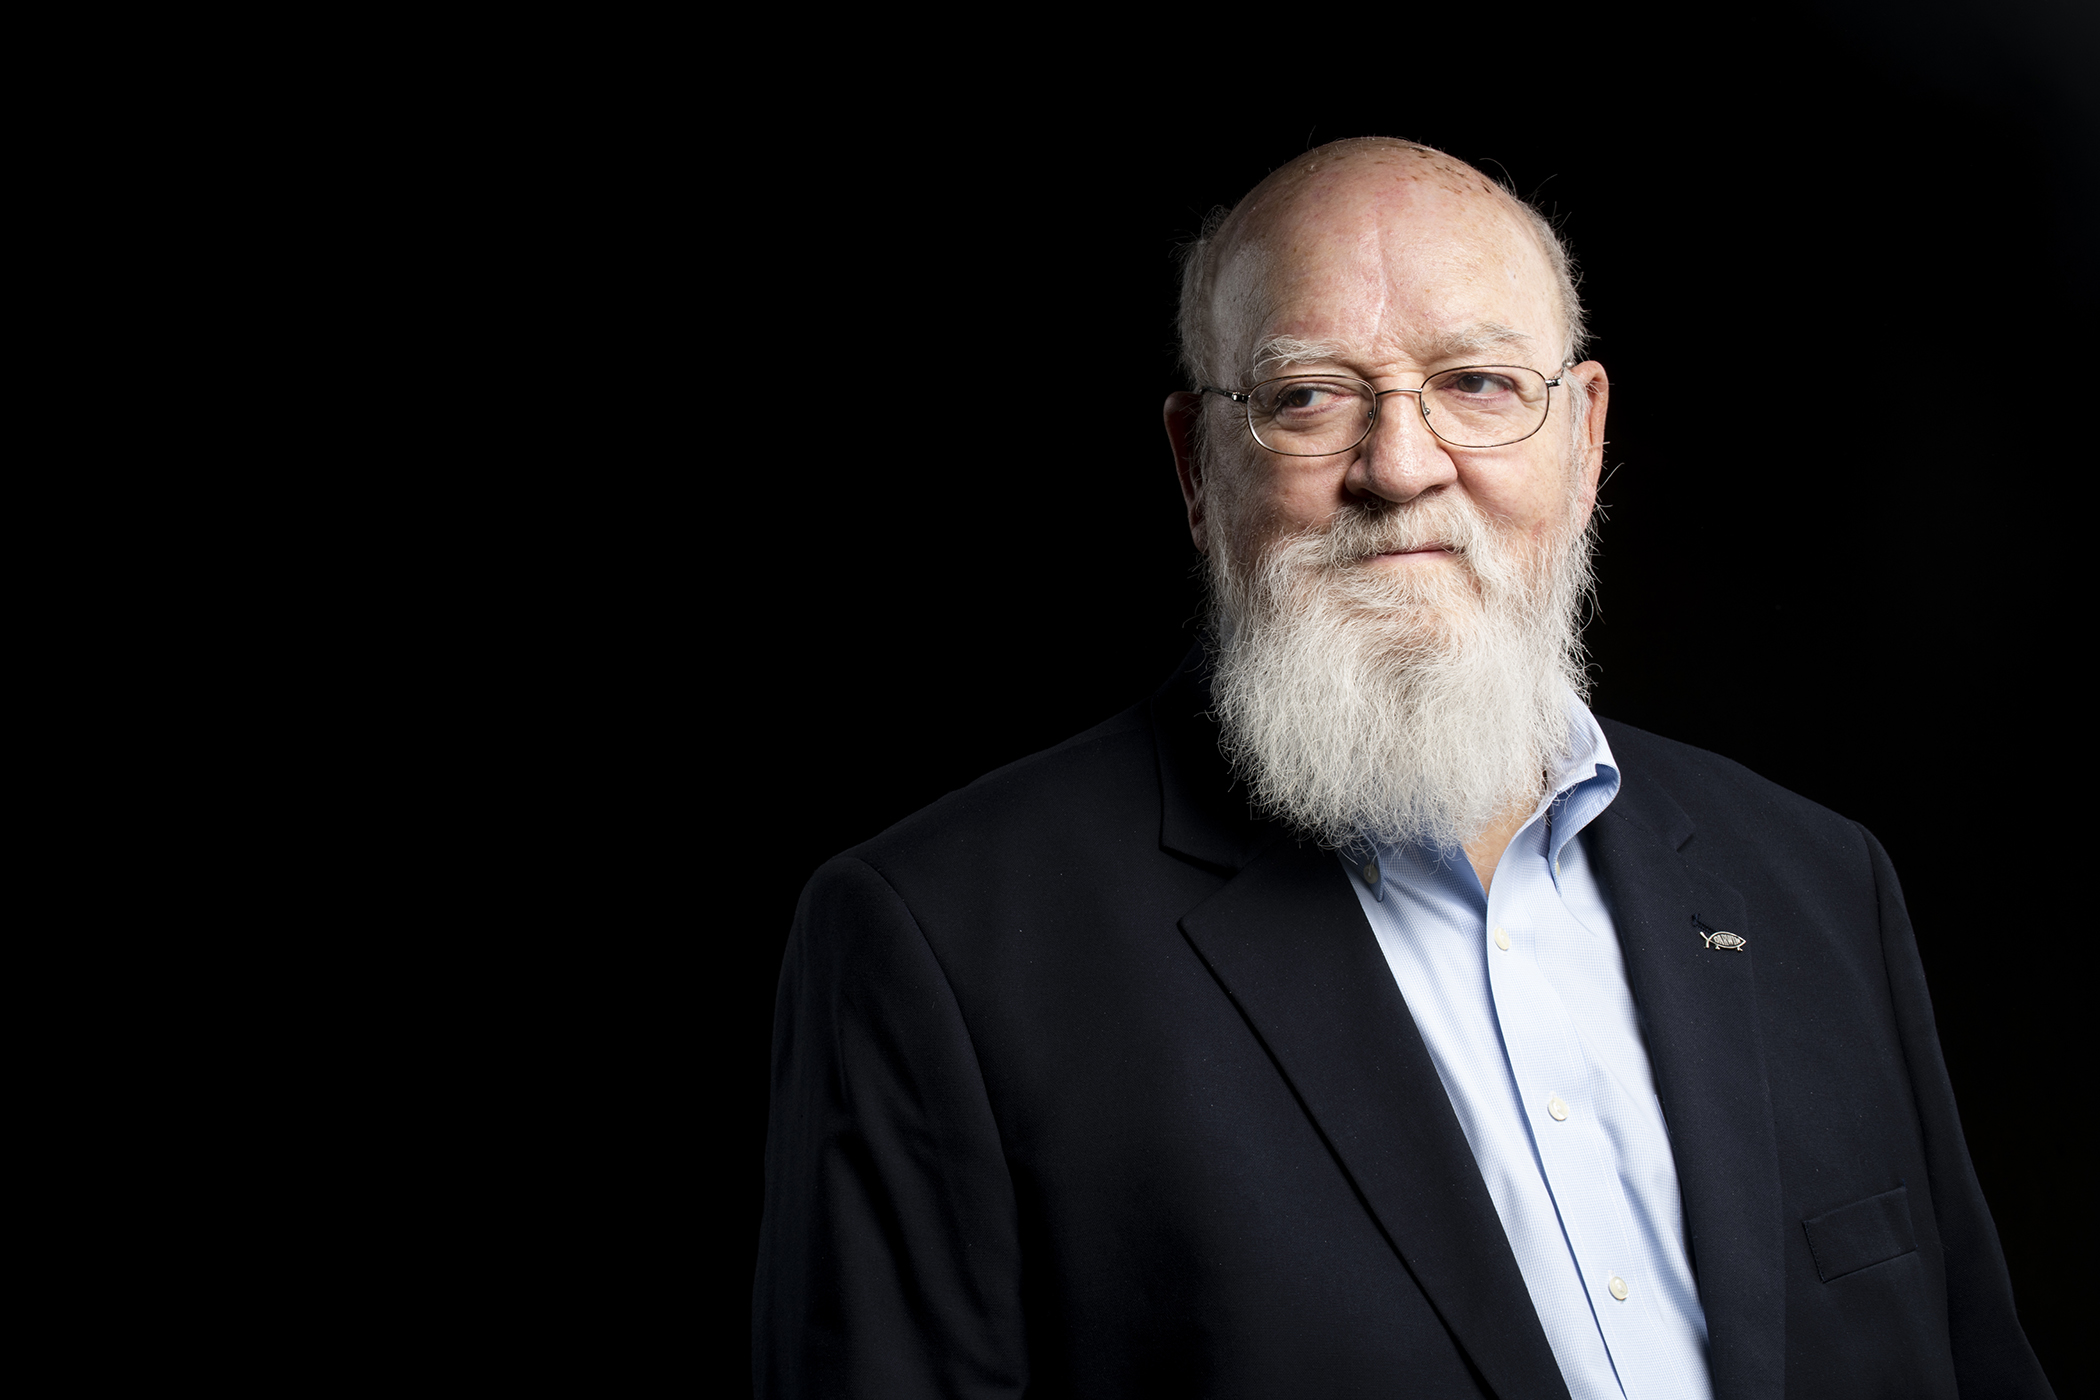 daniel dennett, atheist philosopher guided by science, dies at 82